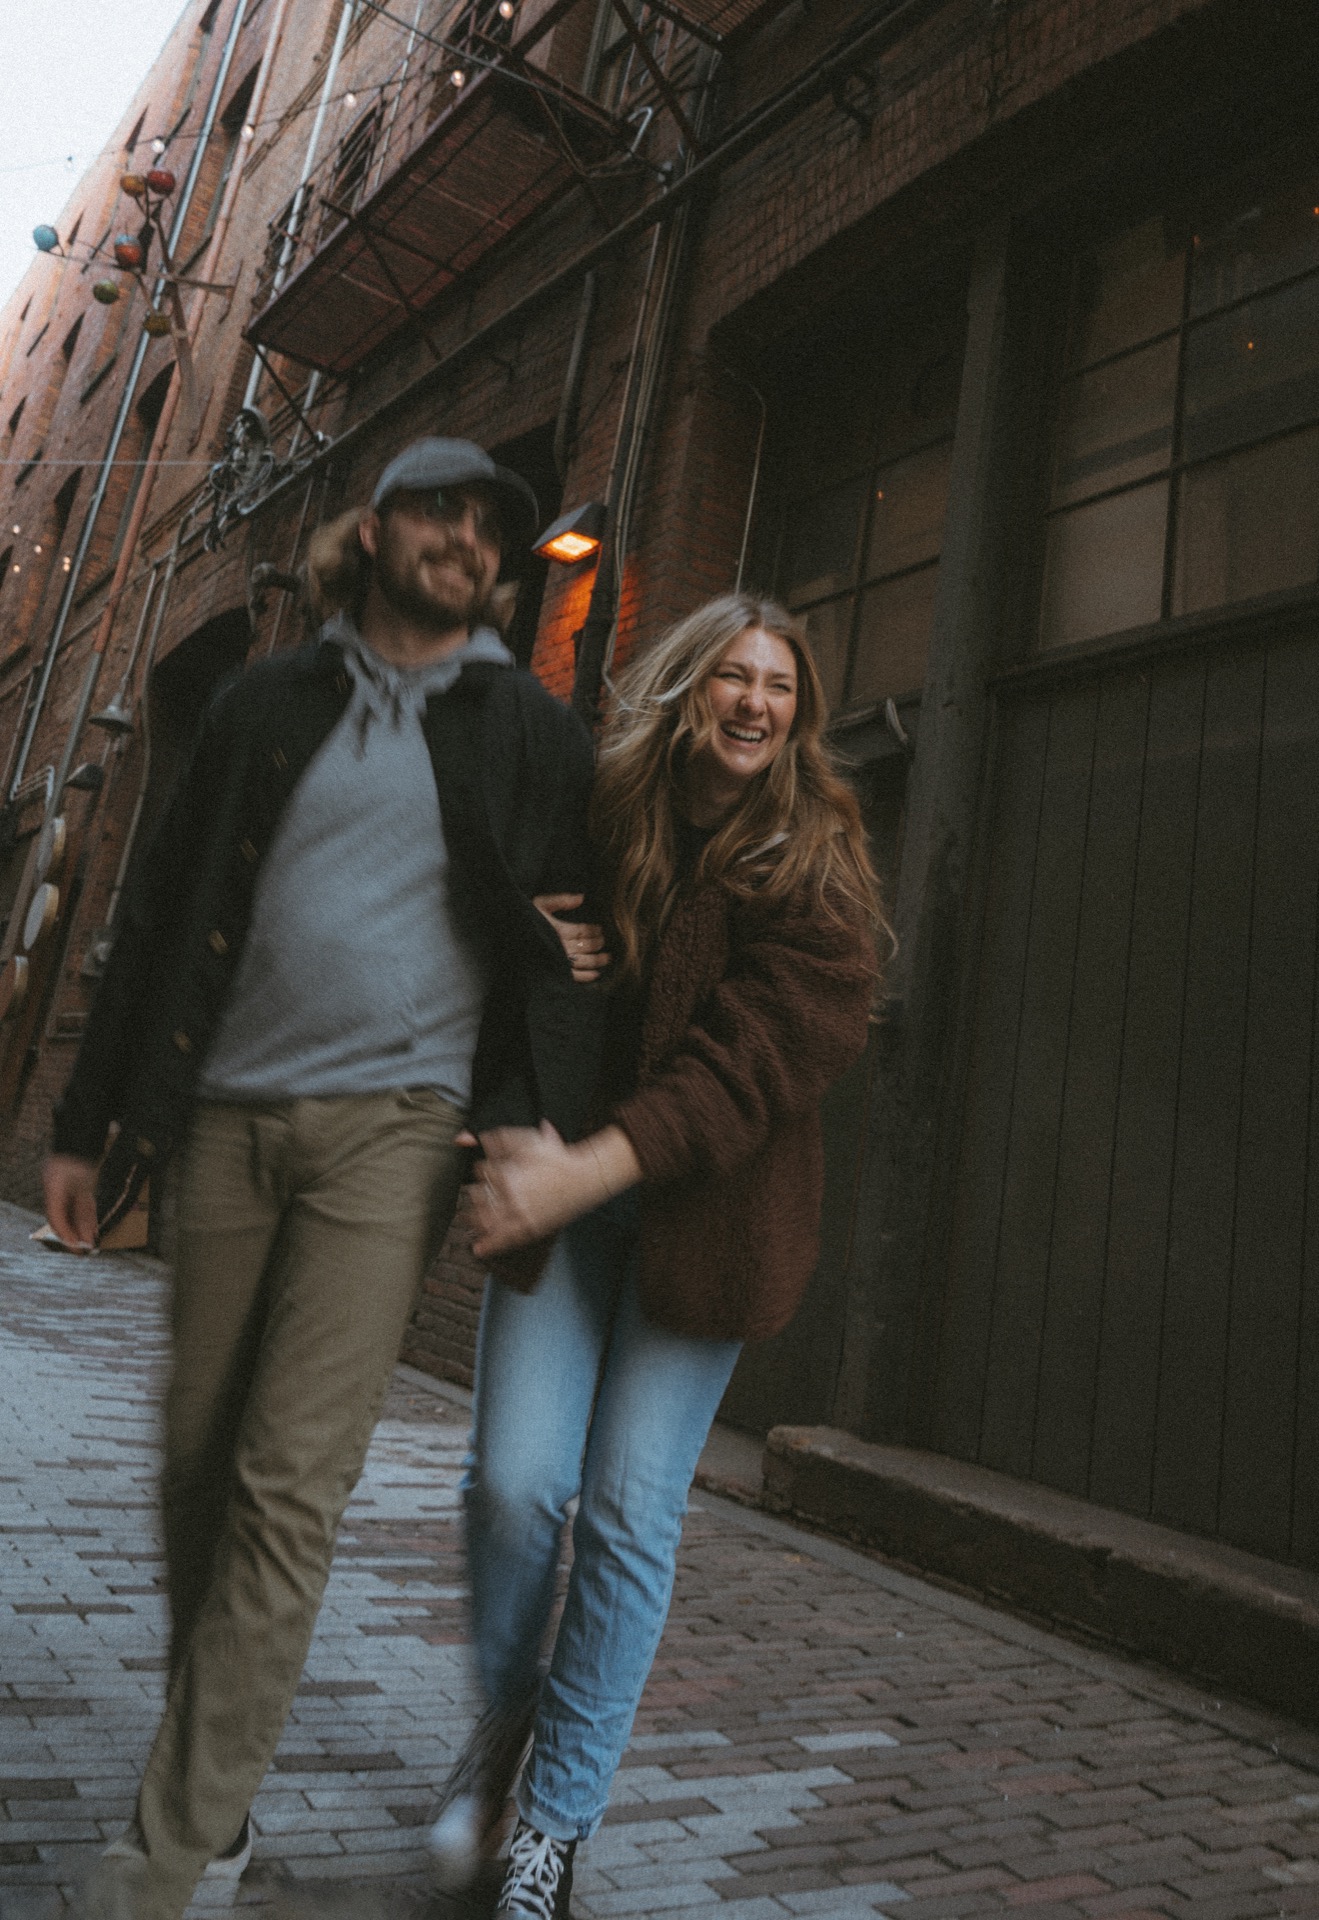 A portrait of a male and a female couple walking and laughing in alleyway near Pioneer Square, Seattle.